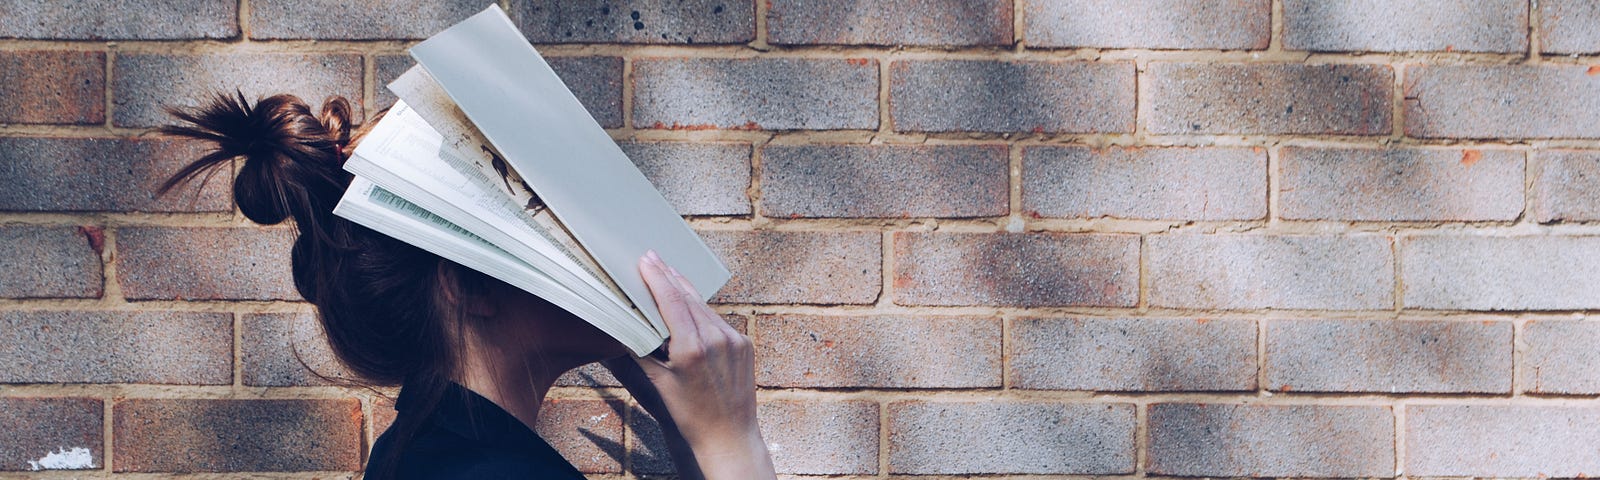 A woman stands in front of a wall and holds an open book in front of her face.